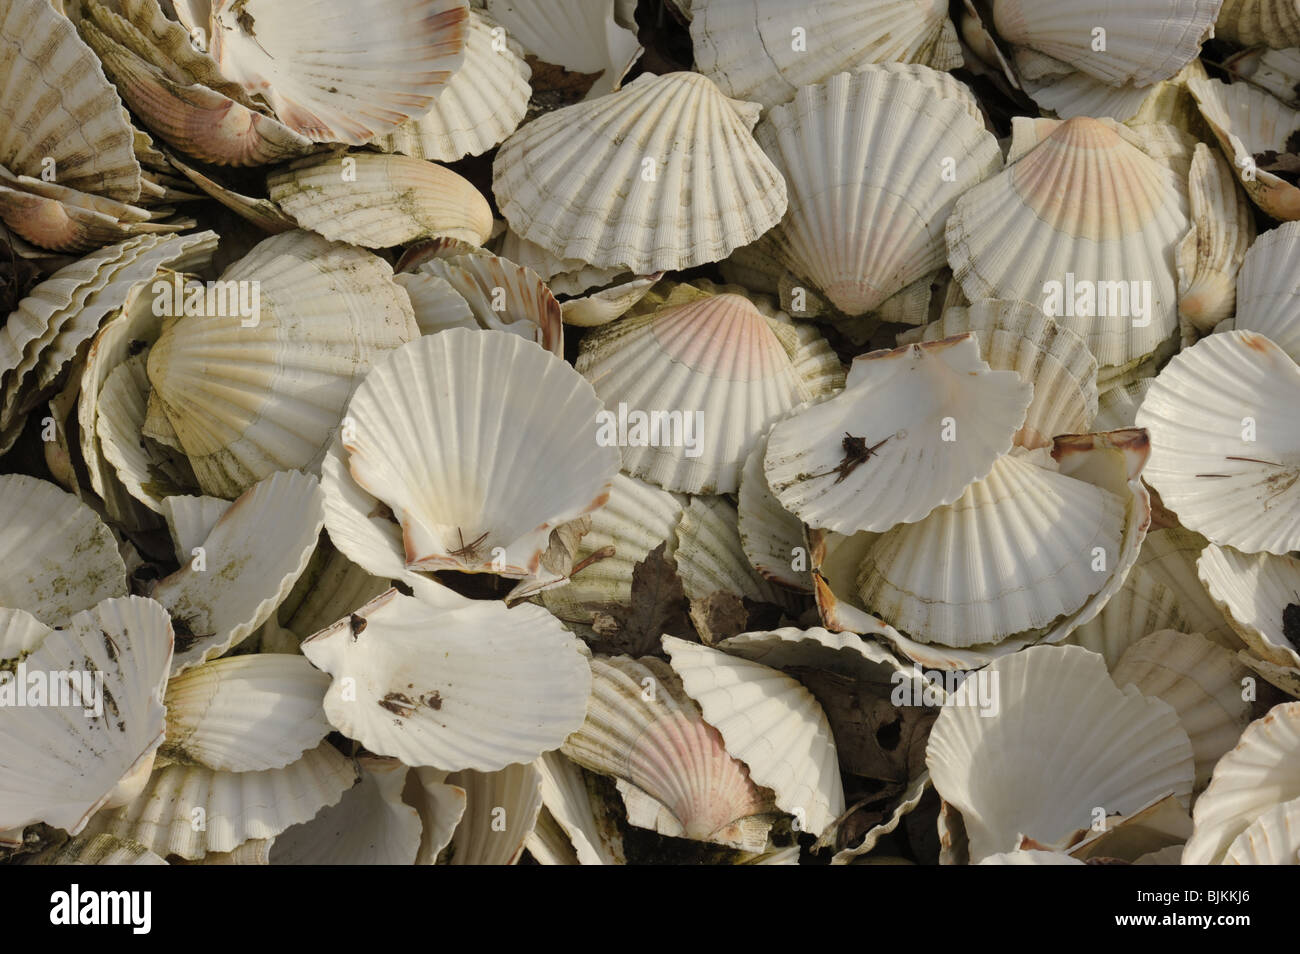 A heap of empty discarded scallop shells Stock Photo